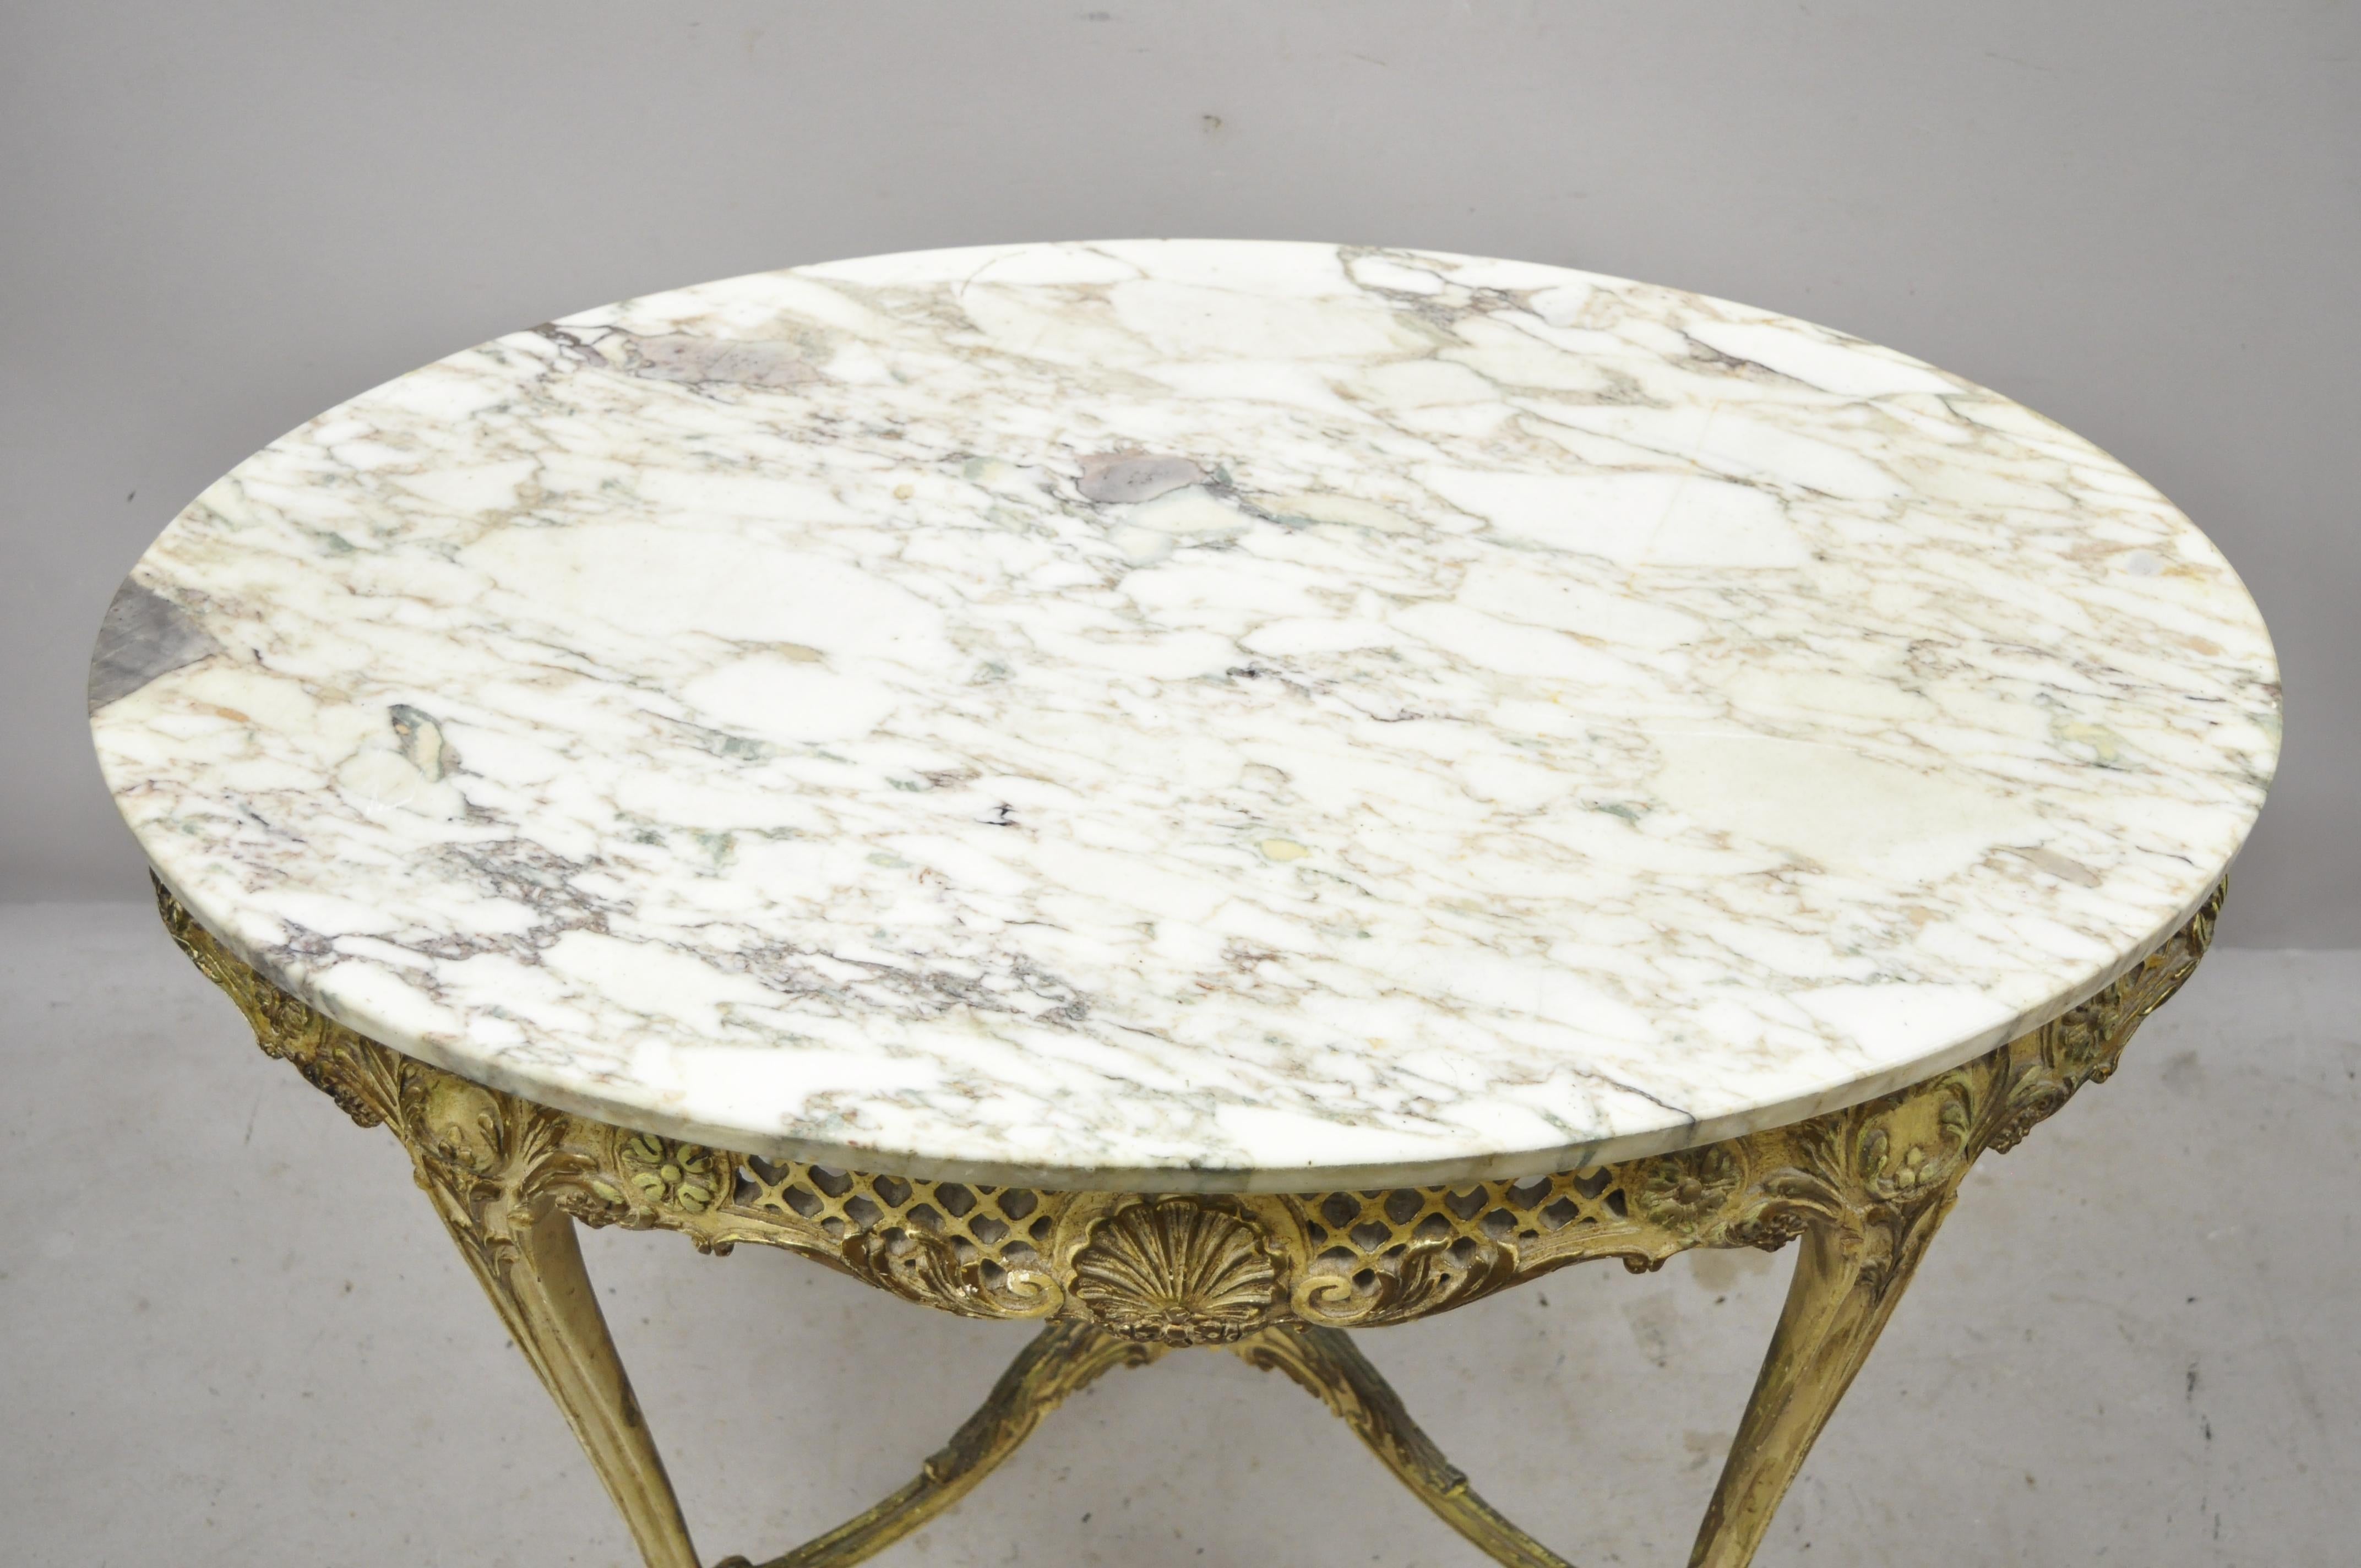 Antique French Louis XV distress painted oval marble top pierce carved parlor accent table. Item features solid carved wood base, oval marble top, pierce carved shell skirt, stretcher base, distressed finish, cabriole legs, very nice antique item.